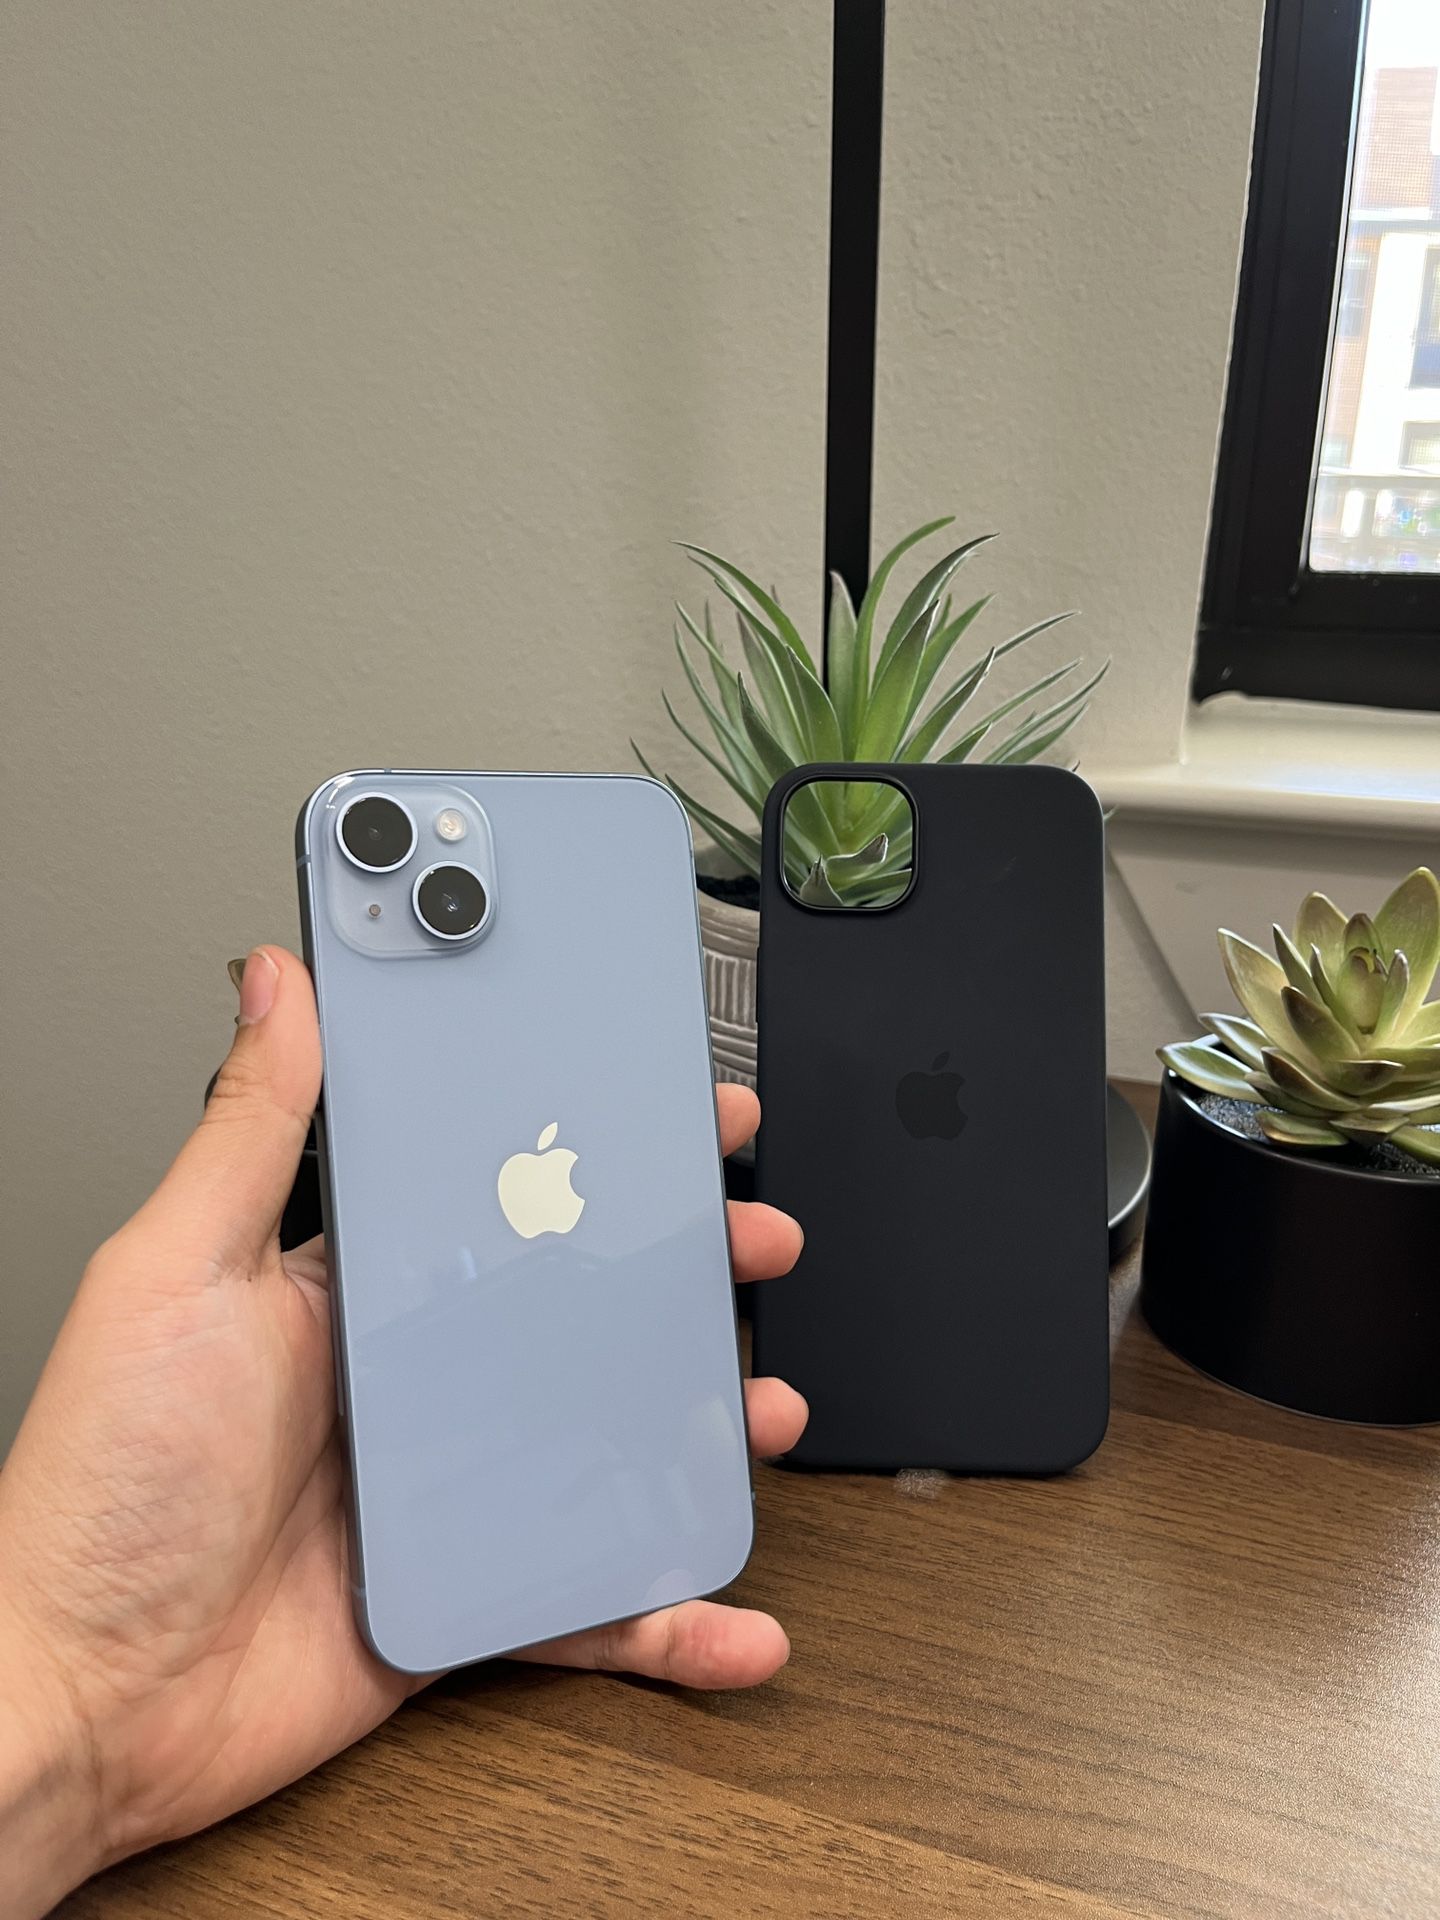 iPhone 14 Plus 128gb Blue 💙⭐️ Unlocked Any Carrier! Verizon AT&T Cricket T-mobile Metro Mexico Tambien 🇲🇽 international